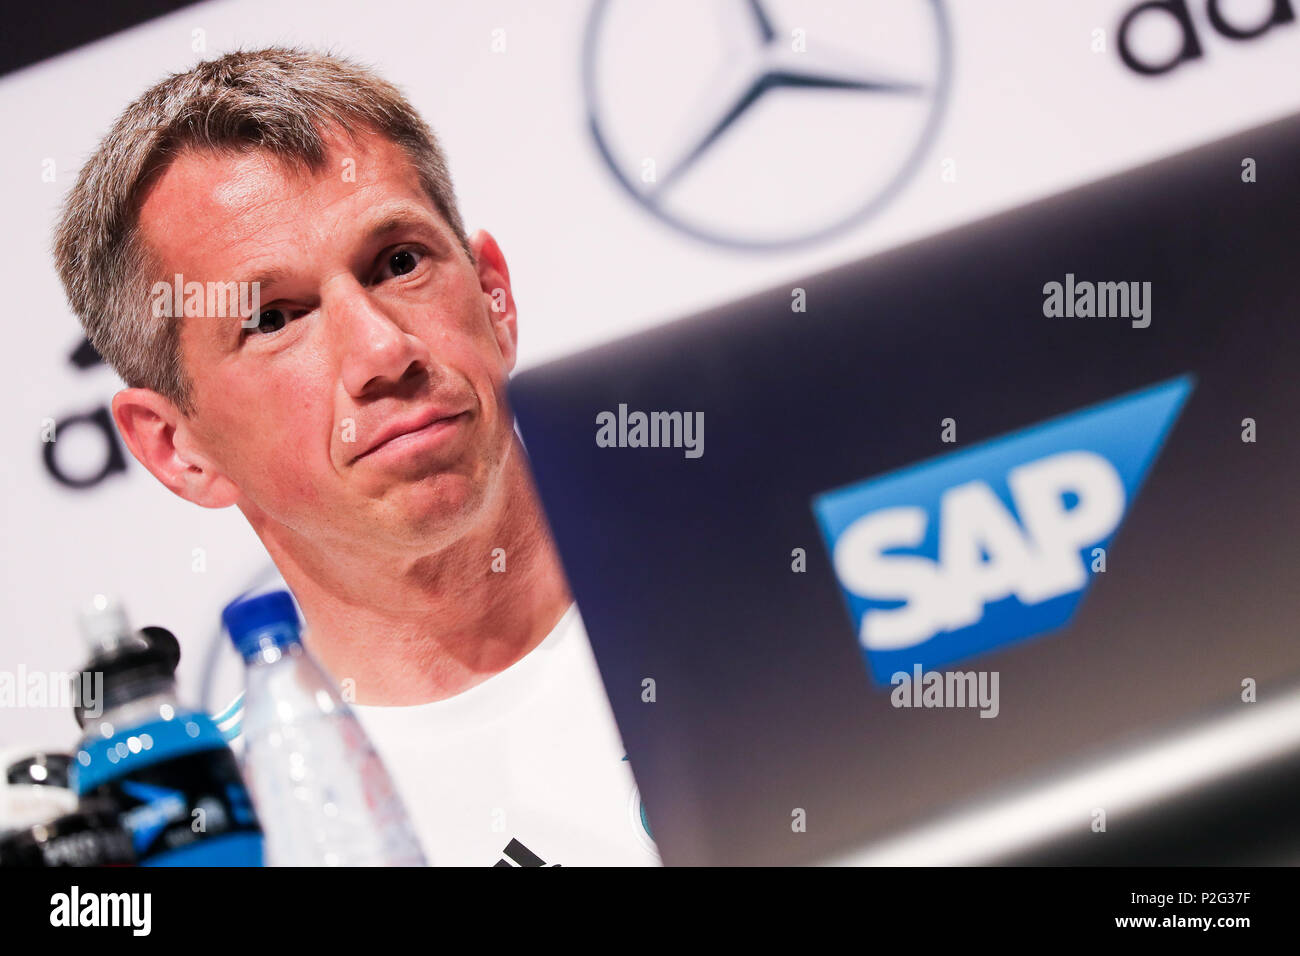 15 June 2018, Russia, Vatutinki: Soccer, World Cup, National team, Germany, team quarters. Christofer Clemens, scouting and match analyst for the DFB ("German Soccer Federation"), talking during the press conference. The DFB and SAP Gave a briefing during a press conference on the use of new technologies like the "video cockpit" and "player dashboard" during training and game analysis. Photo: Christian Charisius/dpa Stock Photo